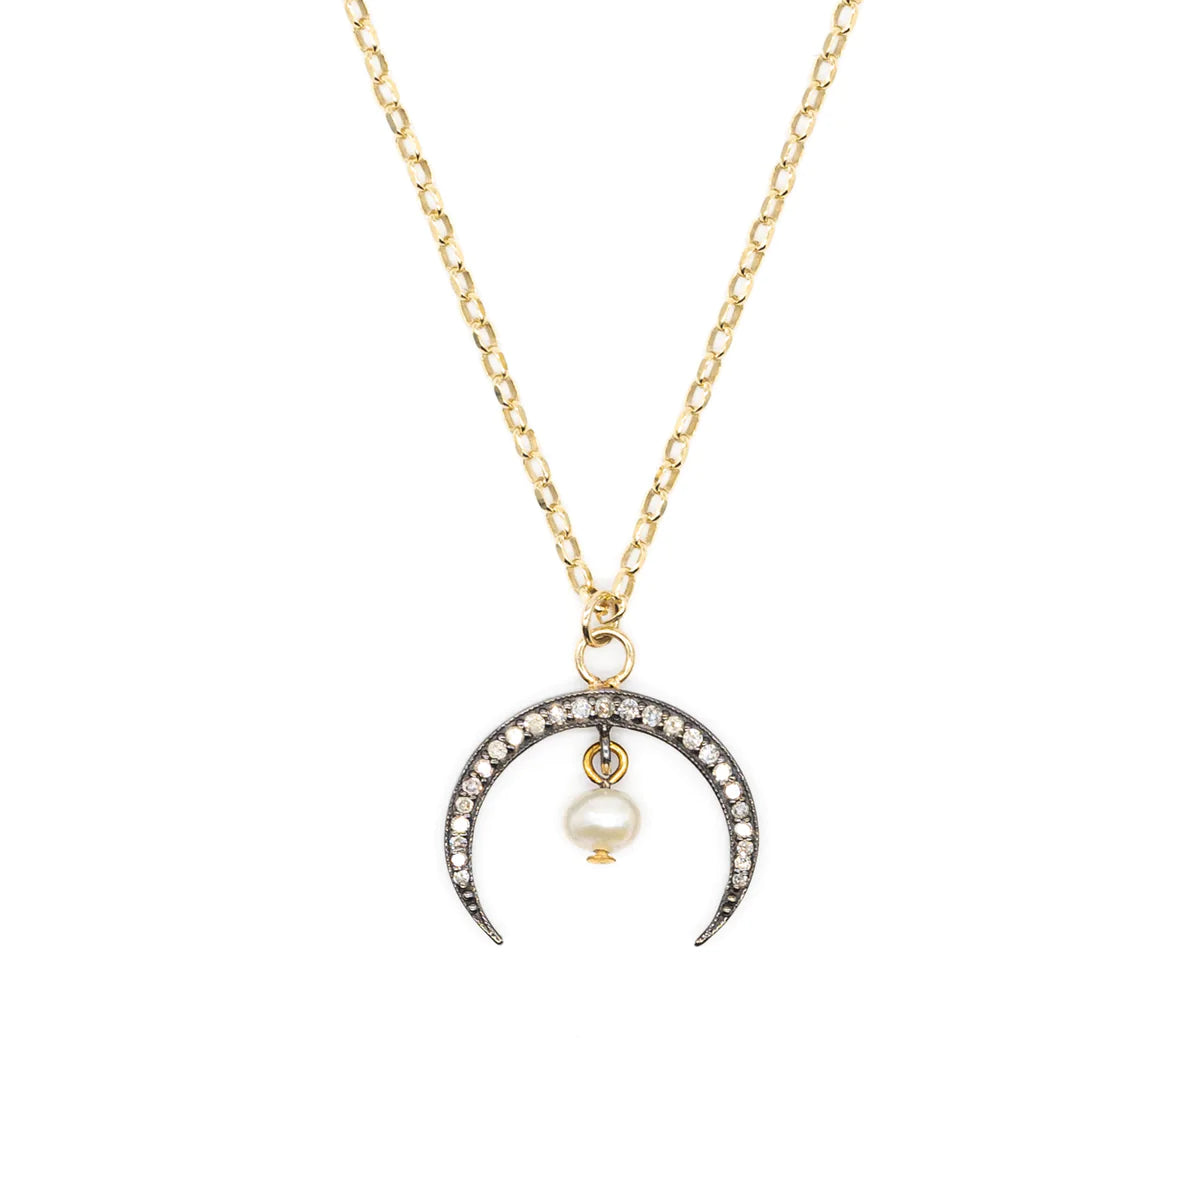 Gold diamond cut belcher necklace with a sterling silver pave diamond encrusted horn with single drop pearl